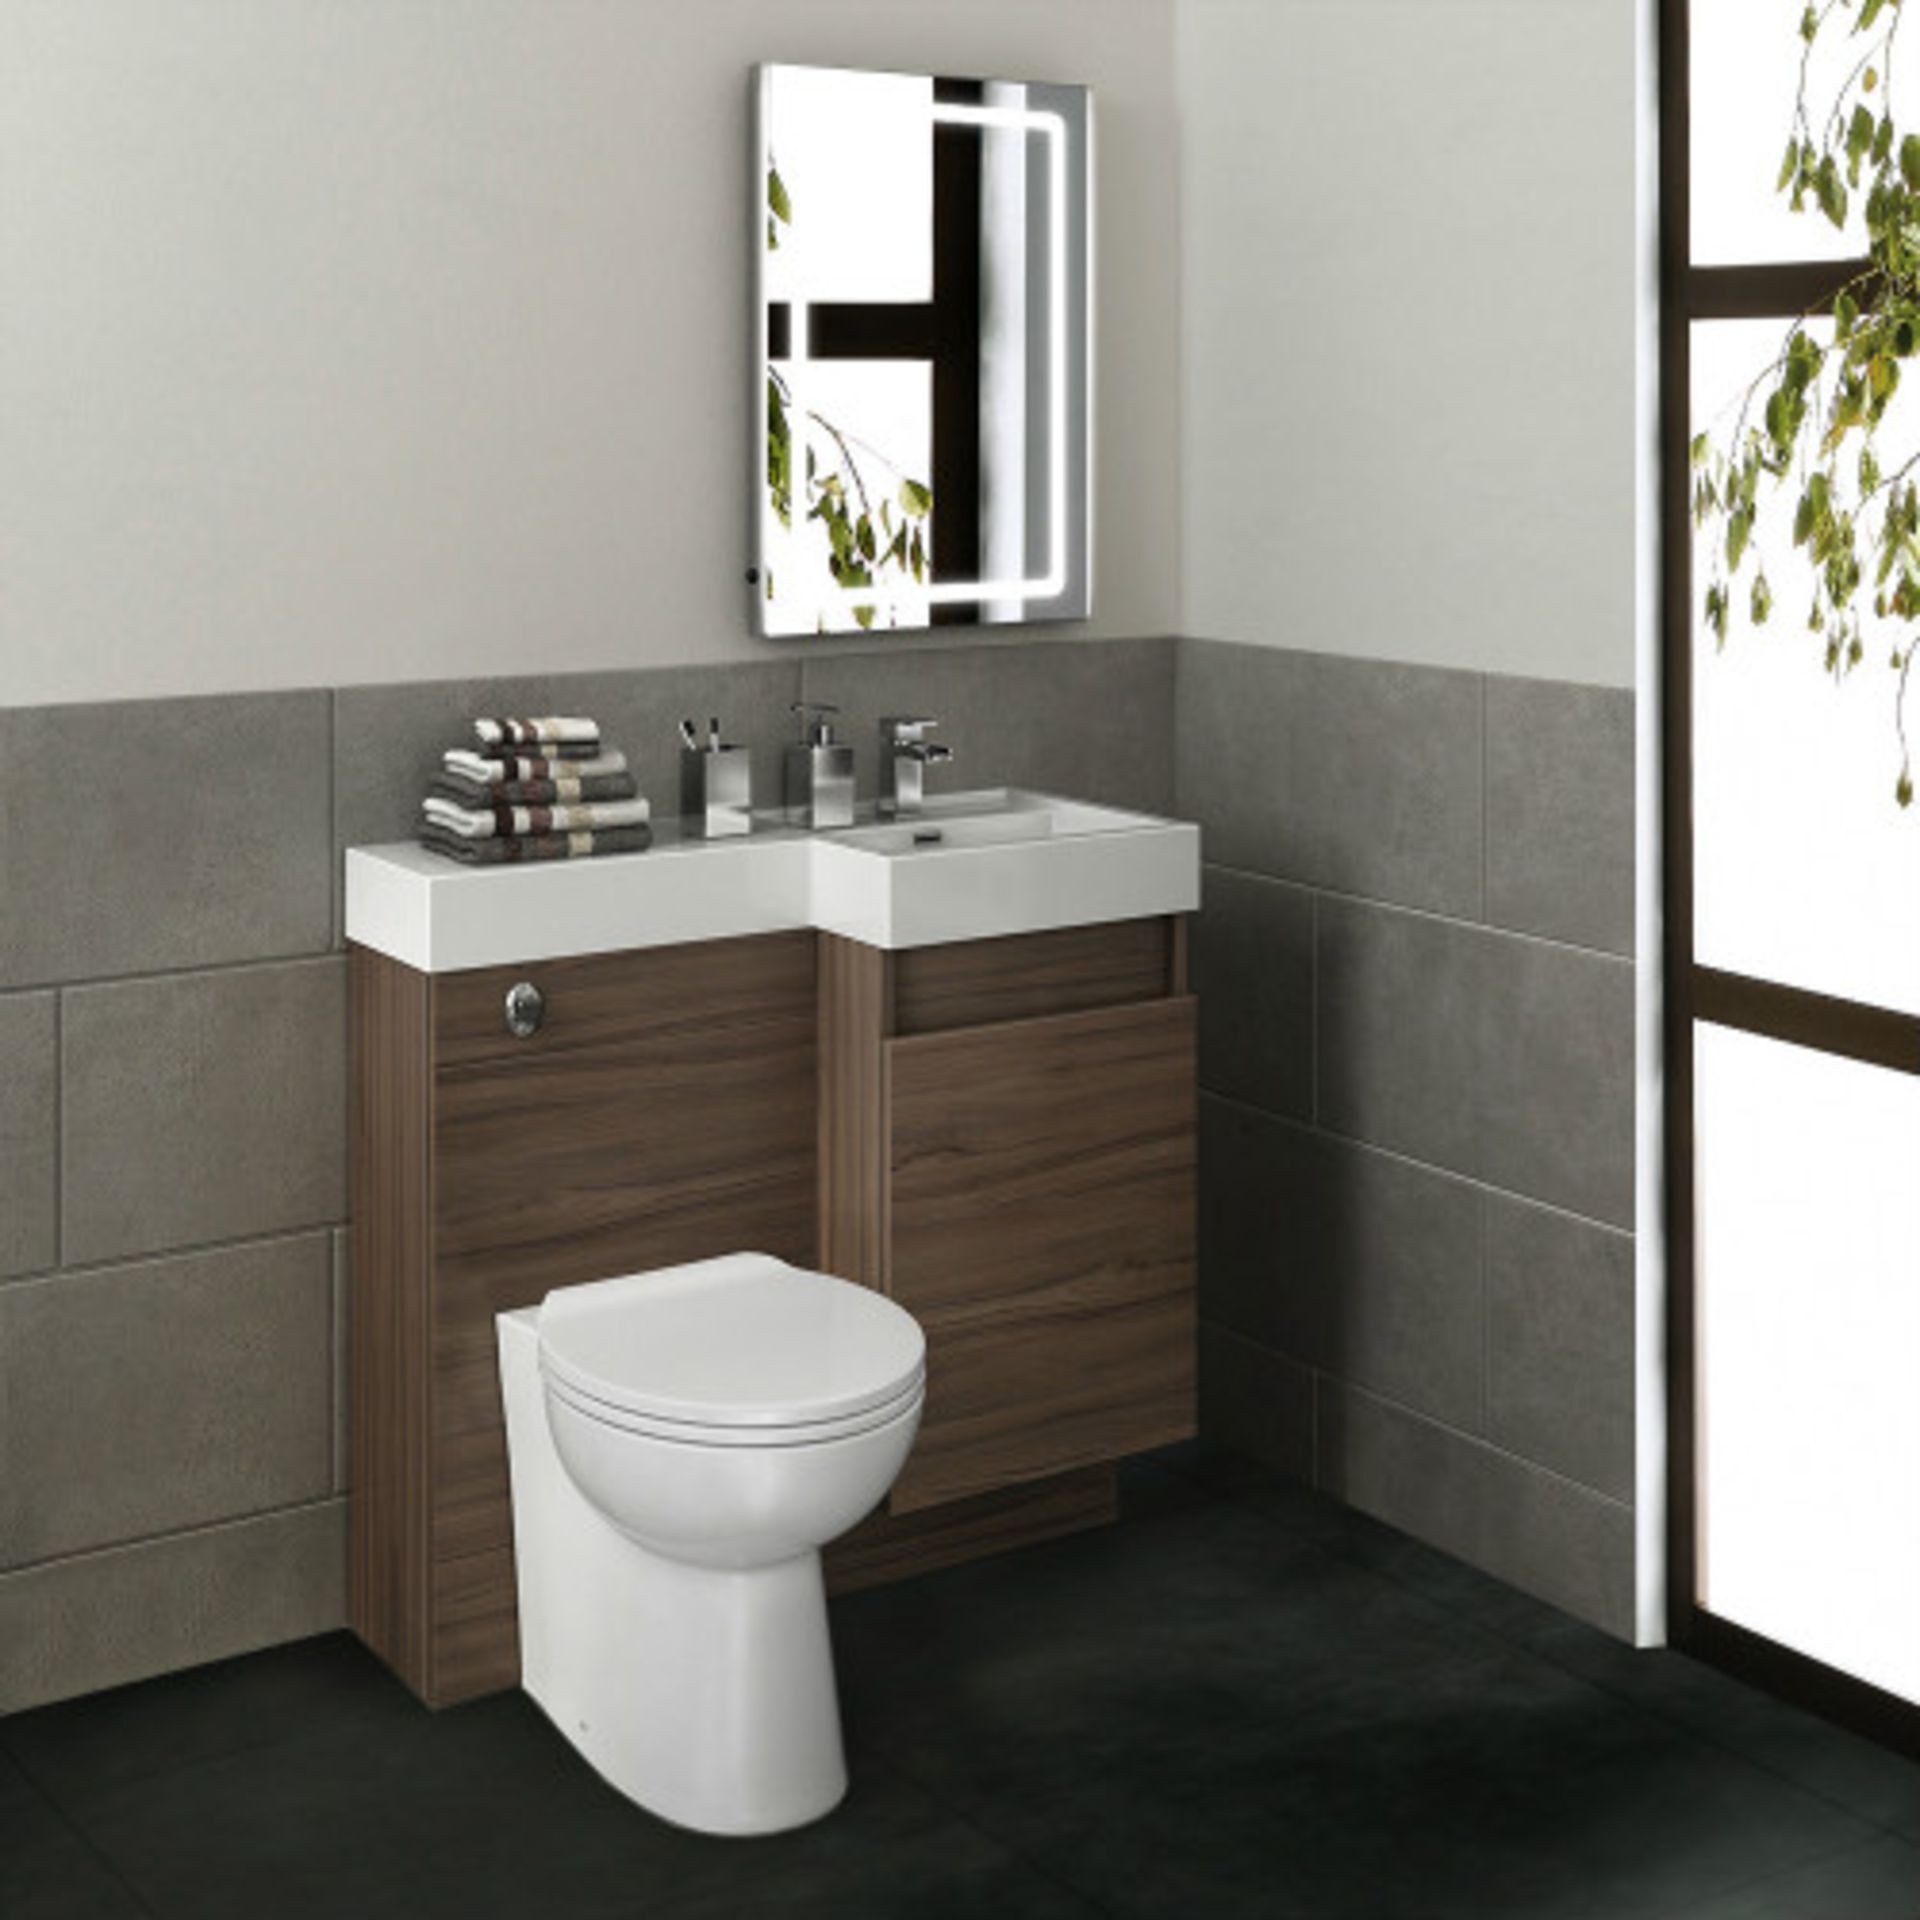 Brand New 906mm Olympia Walnut Effect Drawer Vanity Unit Right with Quartz Pan FULL SET. RRP £999.99 - Image 3 of 3